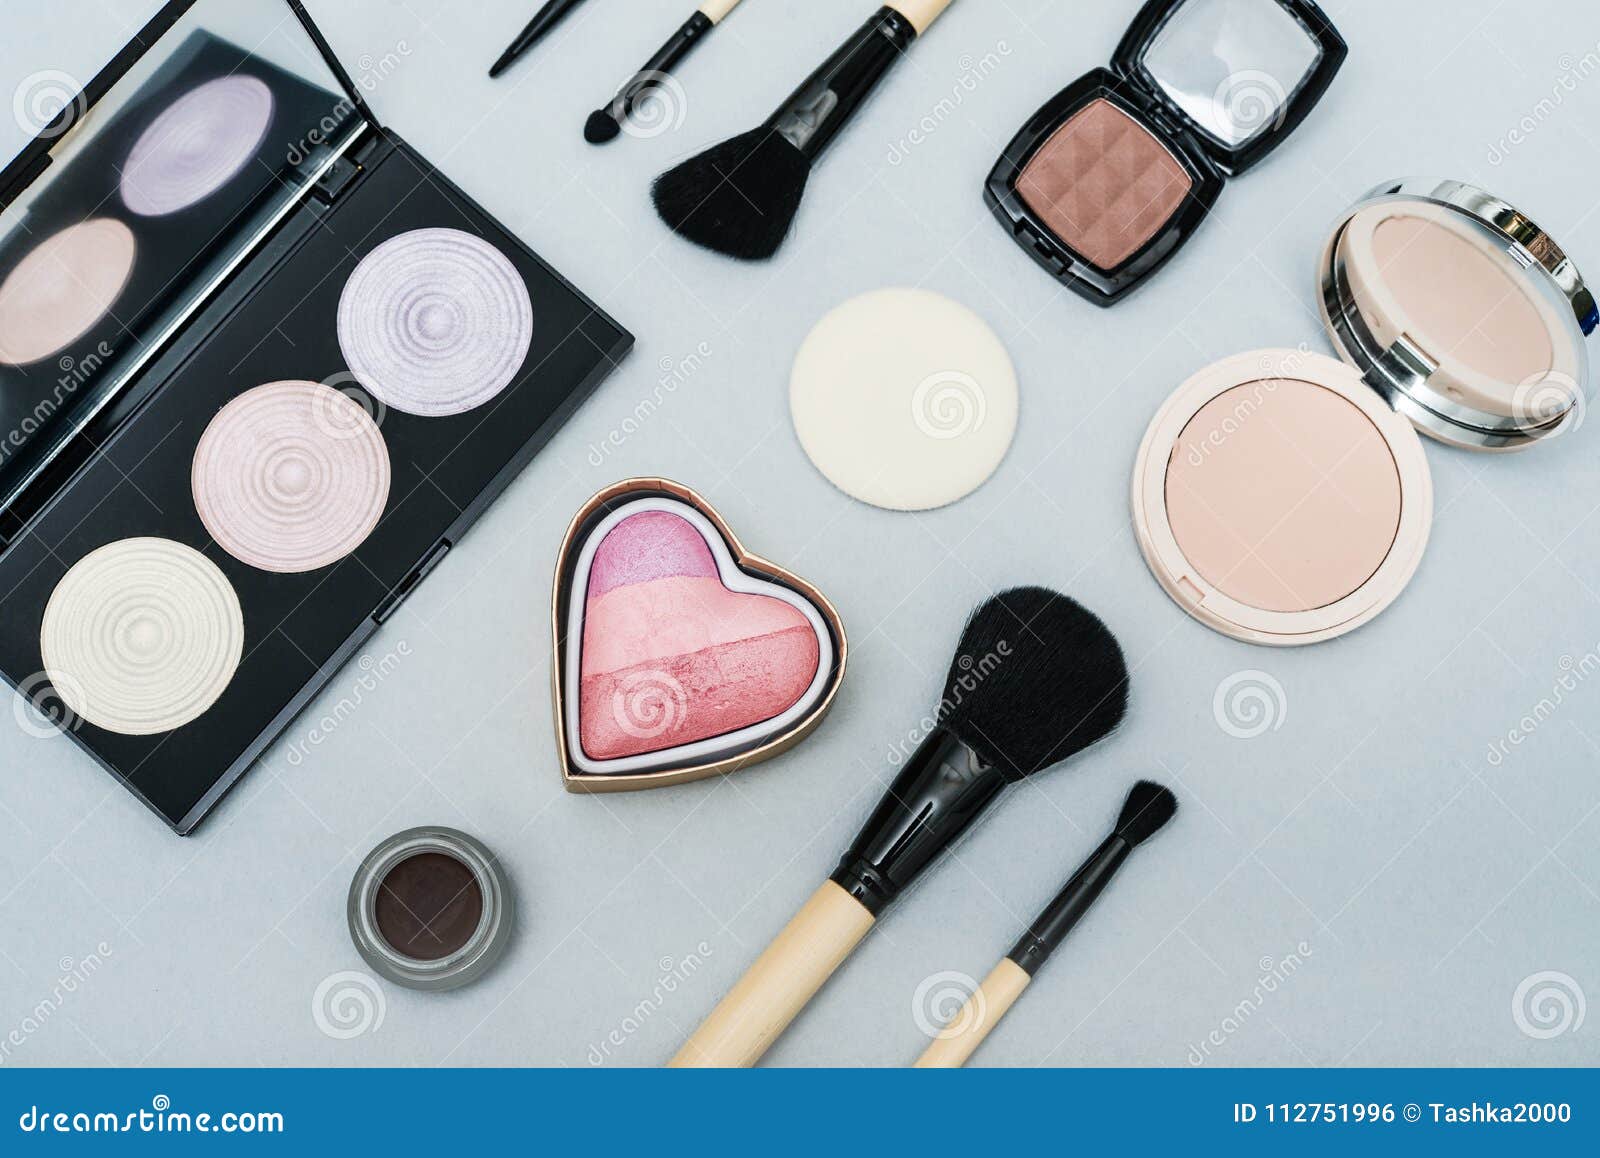 Different Makeup Brushes And Cosmetics Stock Photo Image Of Makeup